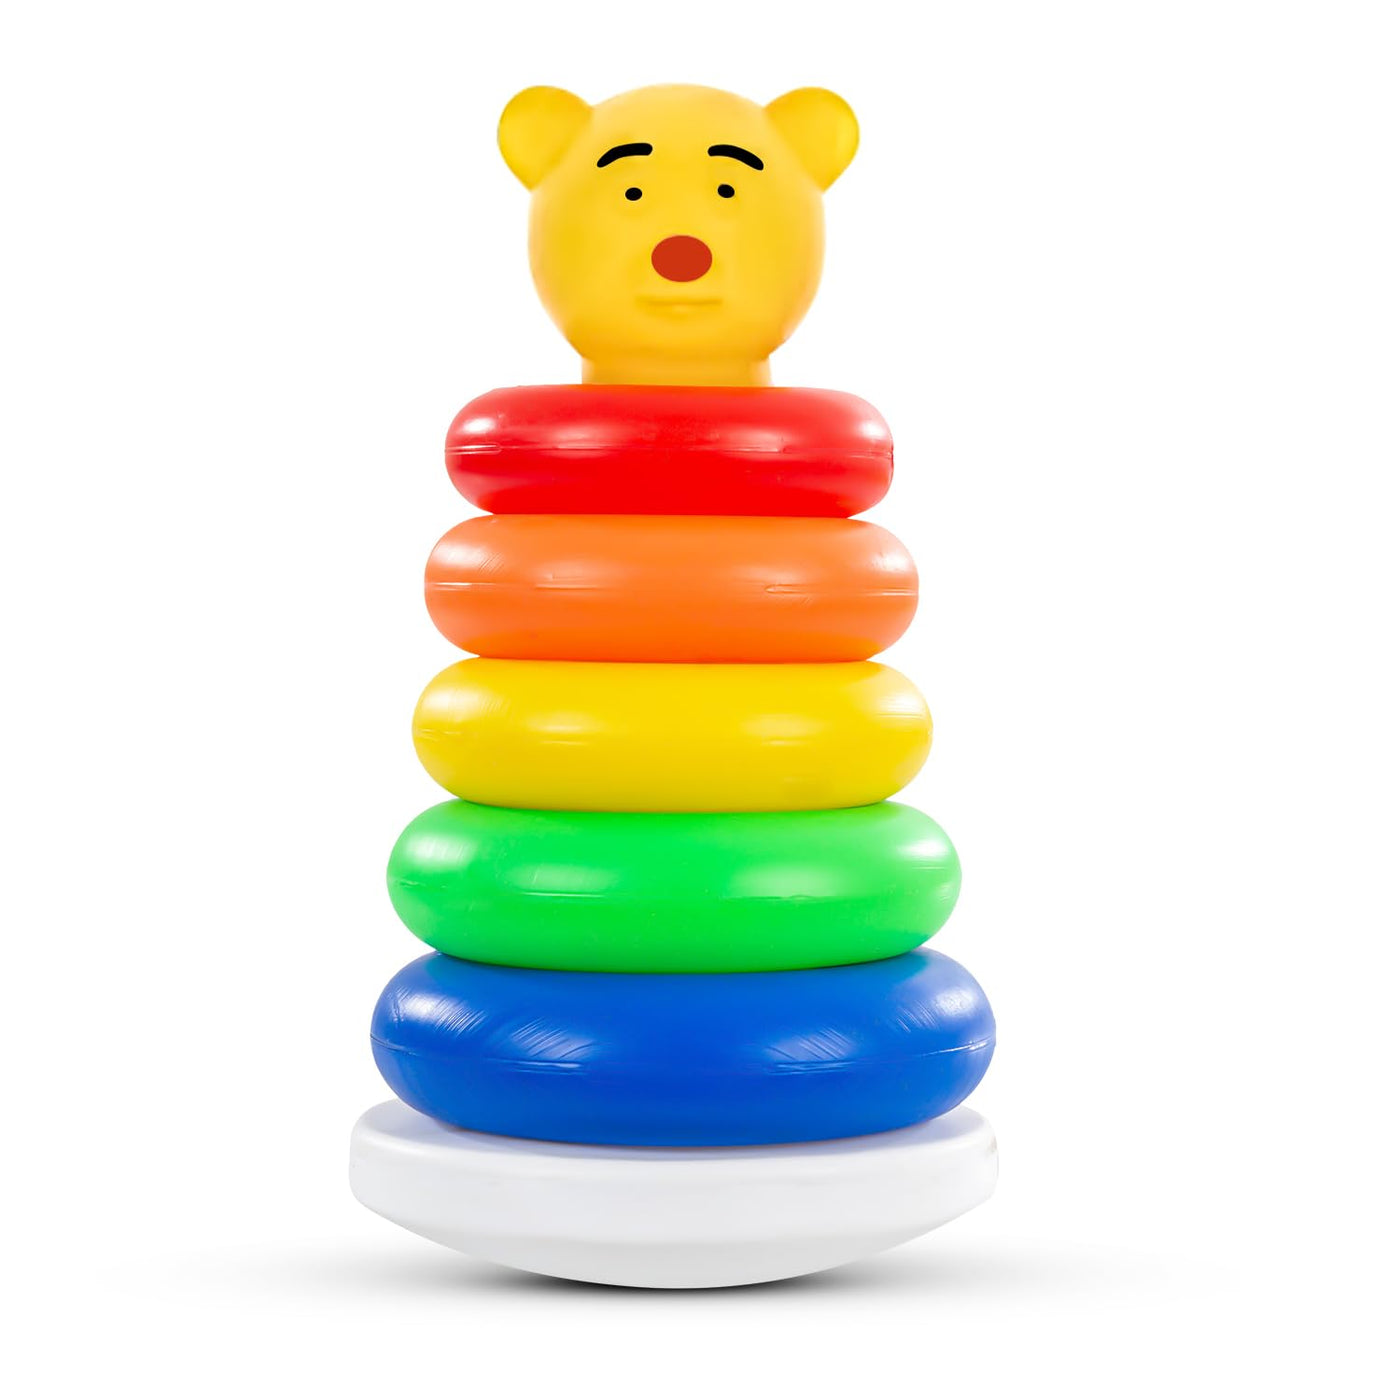 moye kids lover New-born Children's Pyramid Tower Stacking Circle Toys| 7  ring - kids lover New-born Children's Pyramid Tower Stacking Circle Toys| 7  ring . shop for moye products in India. | Flipkart.com